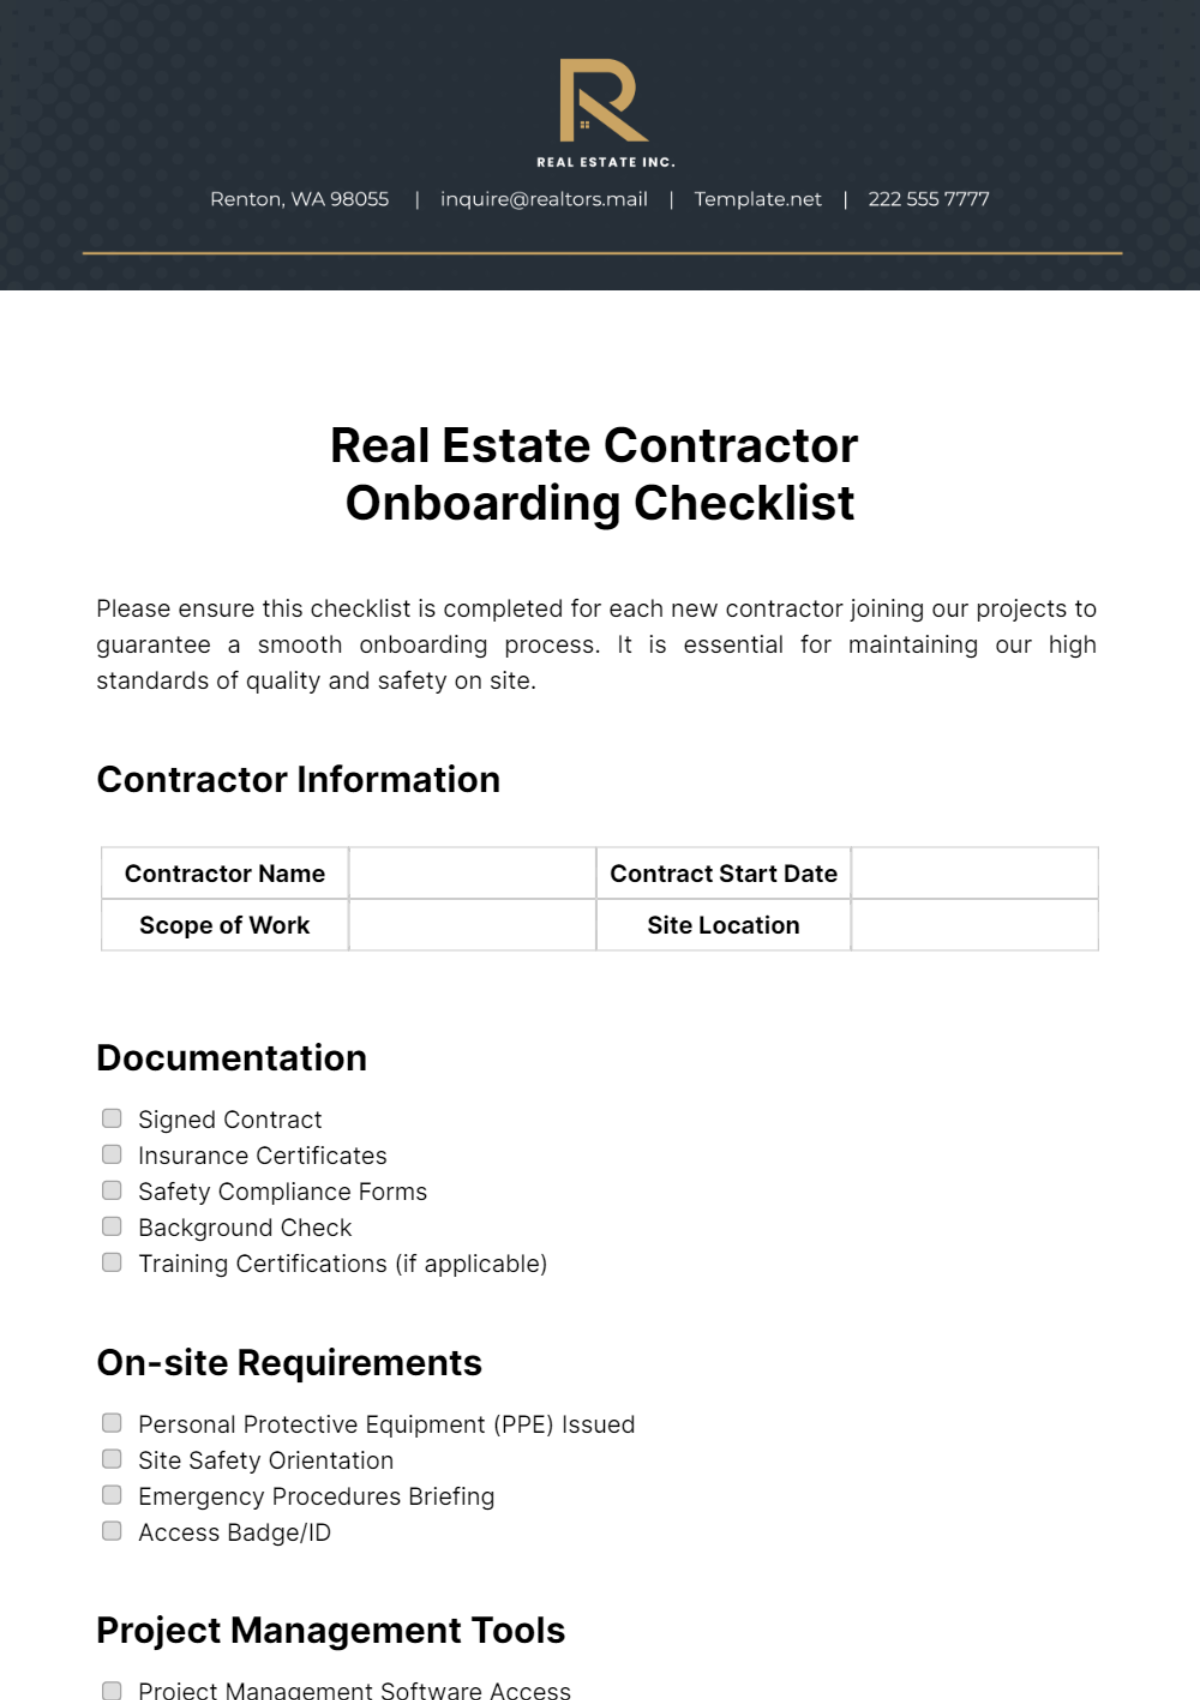 Real Estate Contractor Onboarding Checklist Template